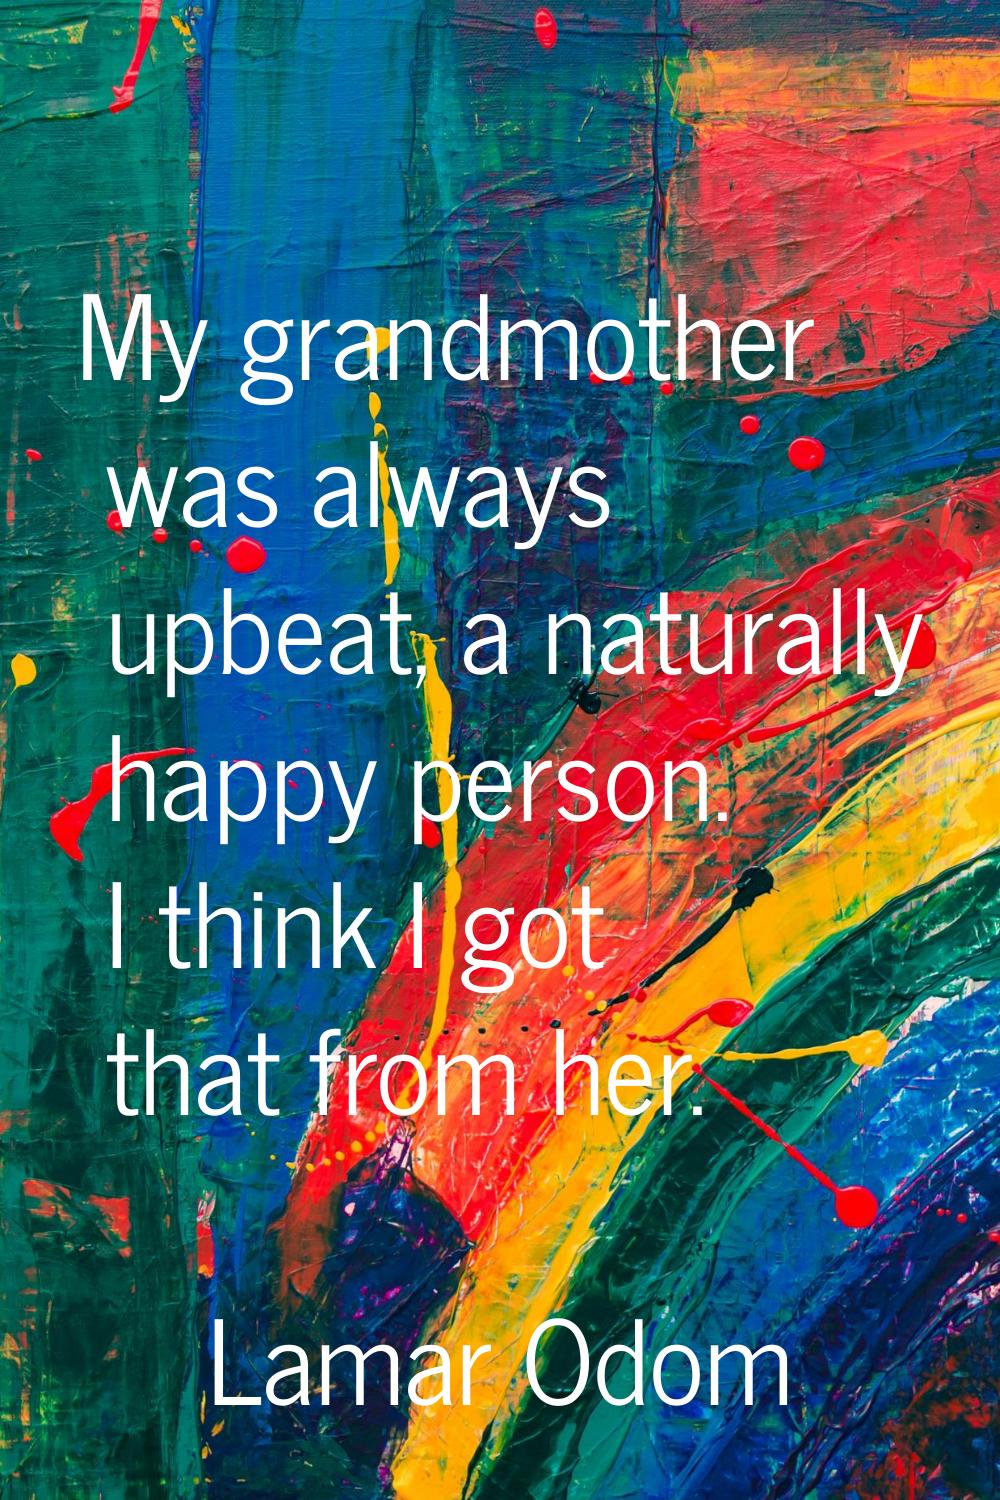 My grandmother was always upbeat, a naturally happy person. I think I got that from her.